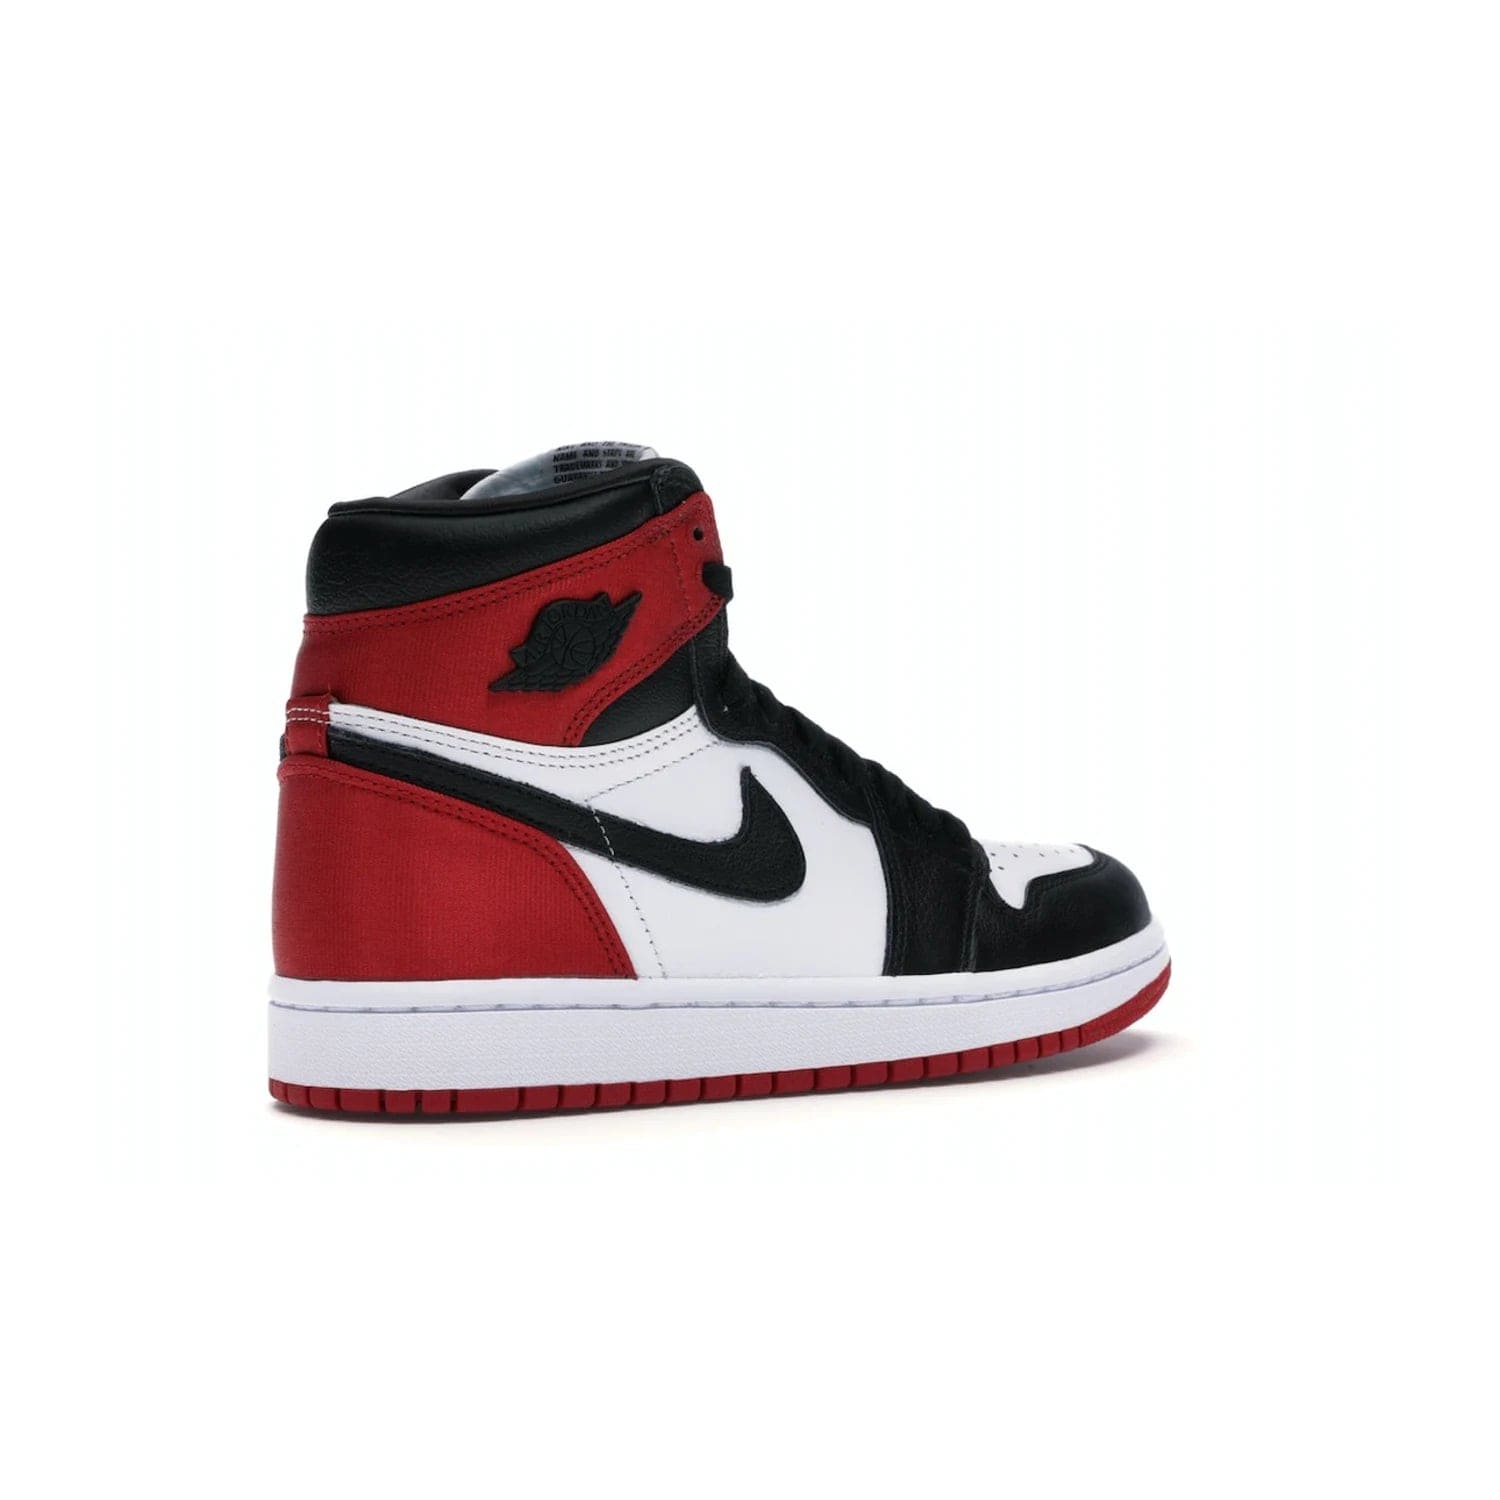 Jordan 1 Retro High Satin Black Toe (Women's) - Image 33 - Only at www.BallersClubKickz.com - Luxurious take on the timeless Air Jordan 1. Features a mix of black leather and satin materials with subtle University Red accents. Elevated look with metal Wings logo on the heel. Released in August 2019.